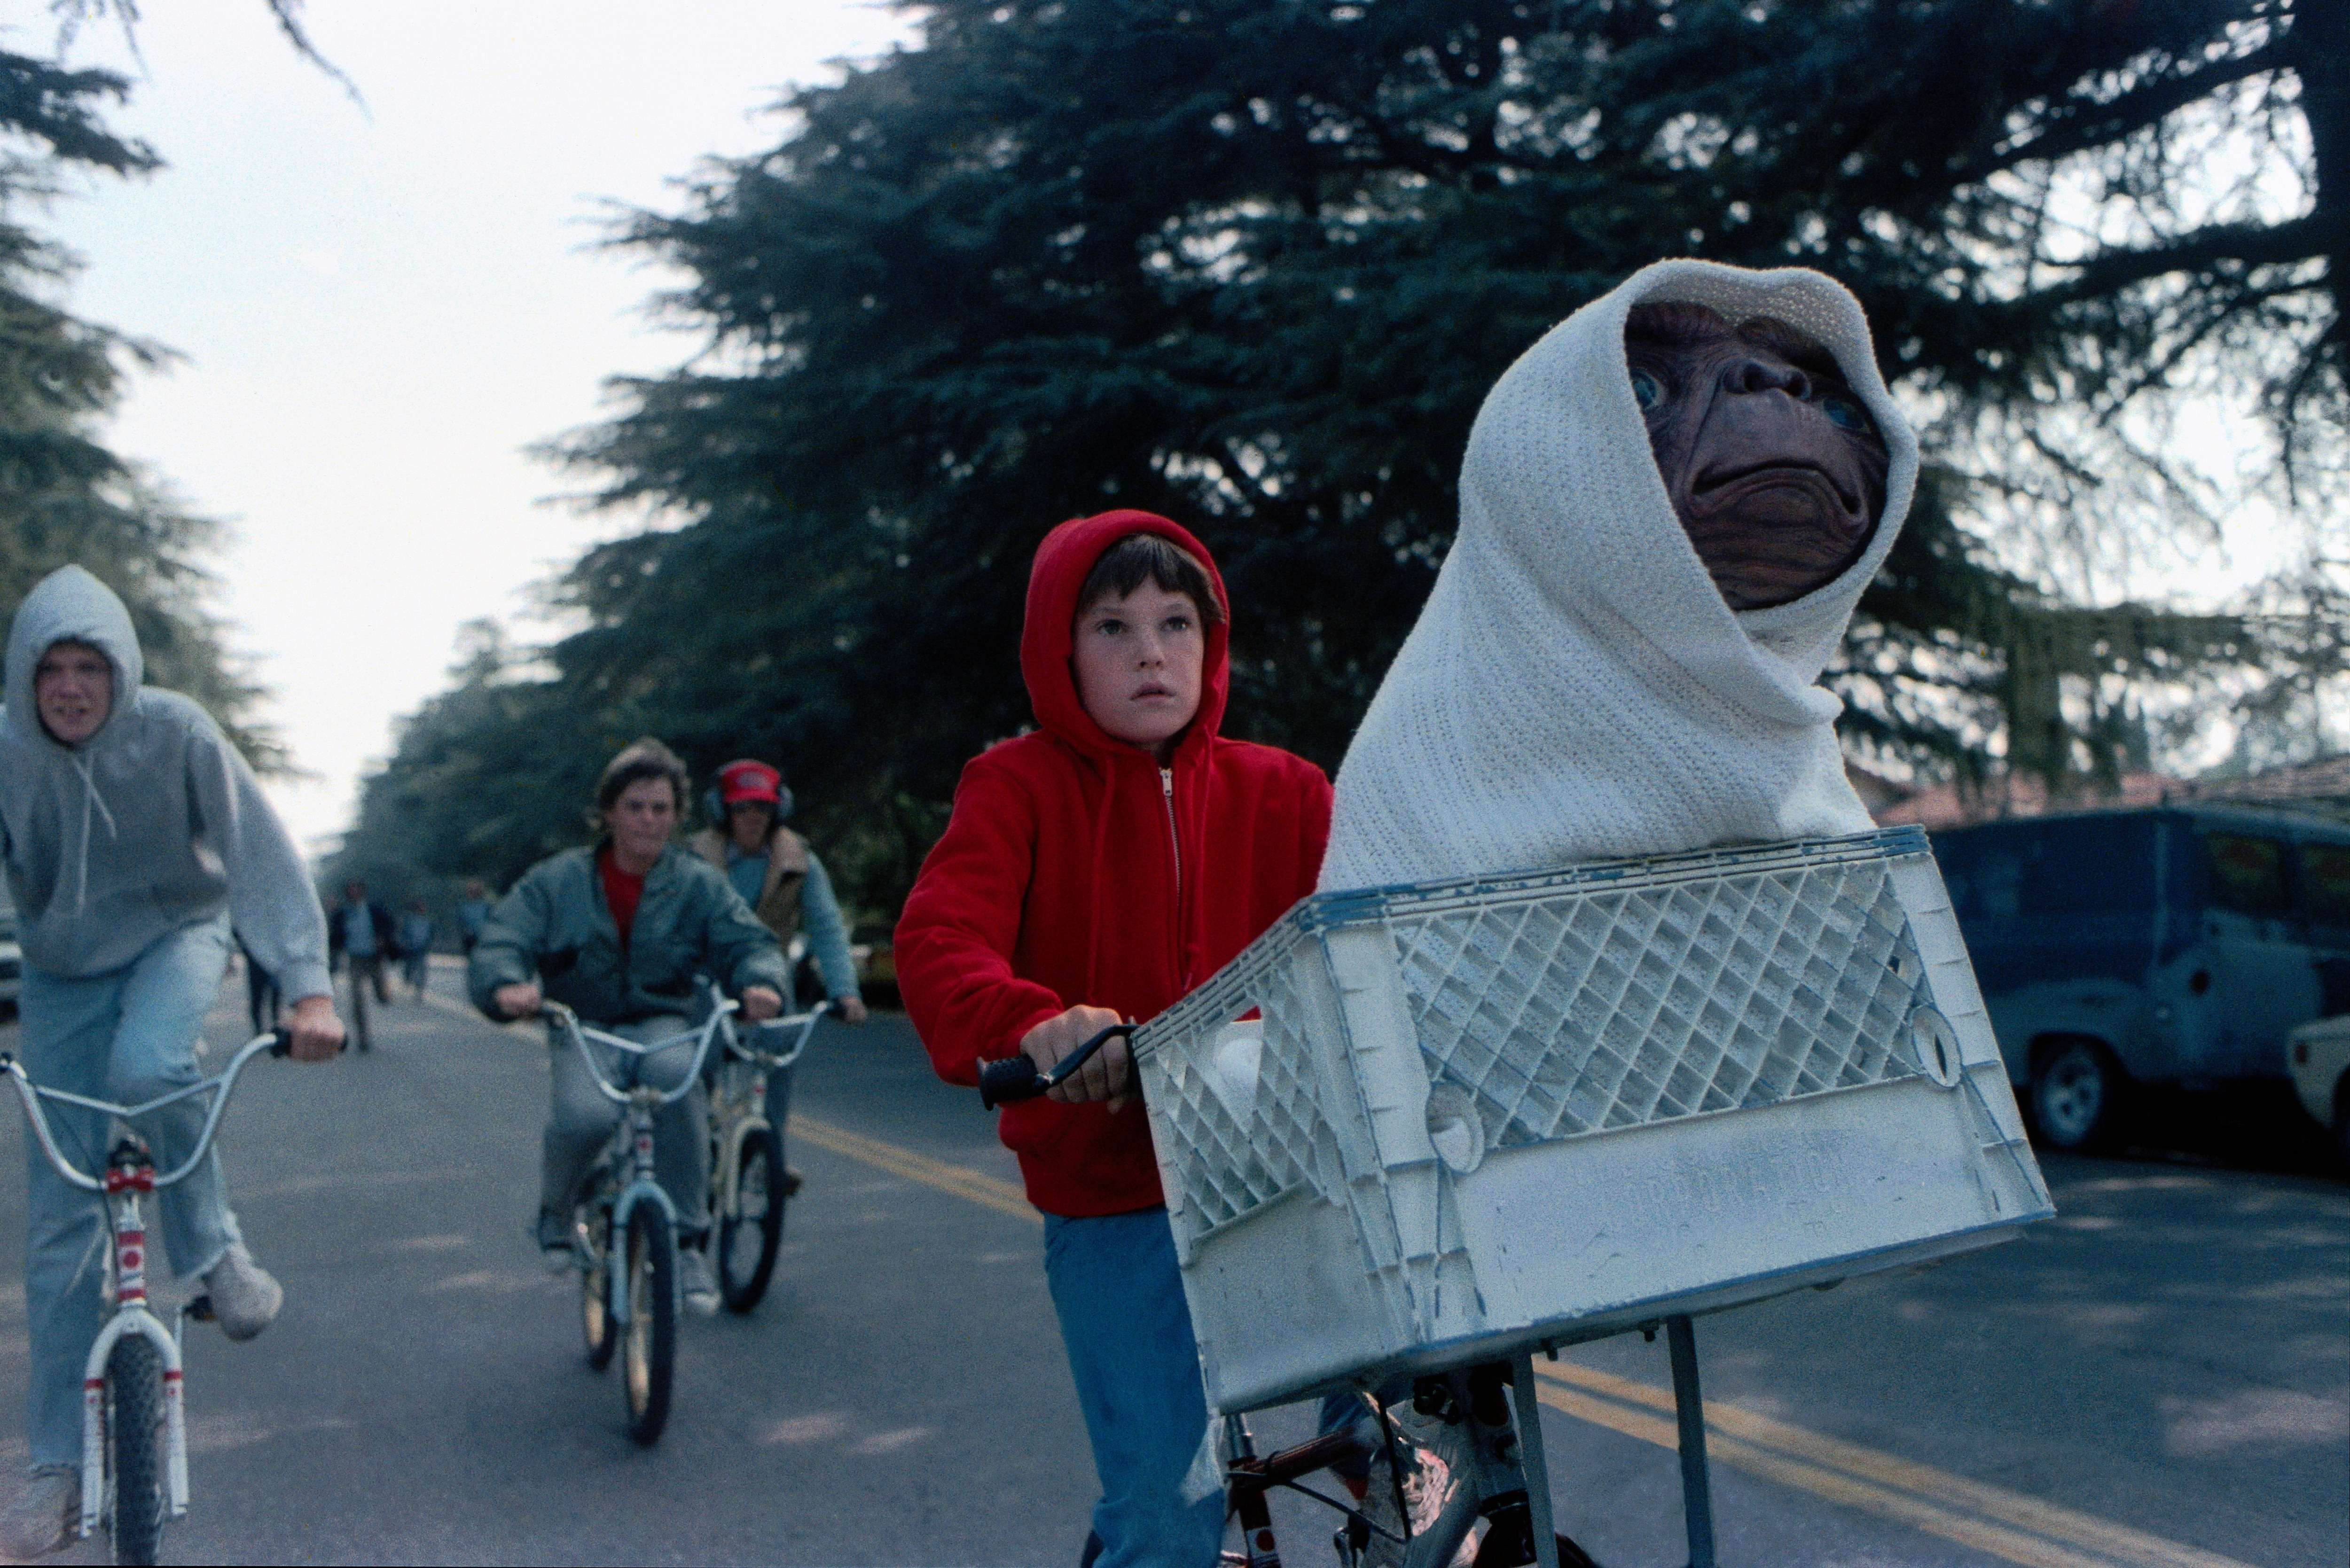 IMAX is getting nostalgic this summer with (very) big screen viewings of ‘E.T.’ and ‘Jaws’